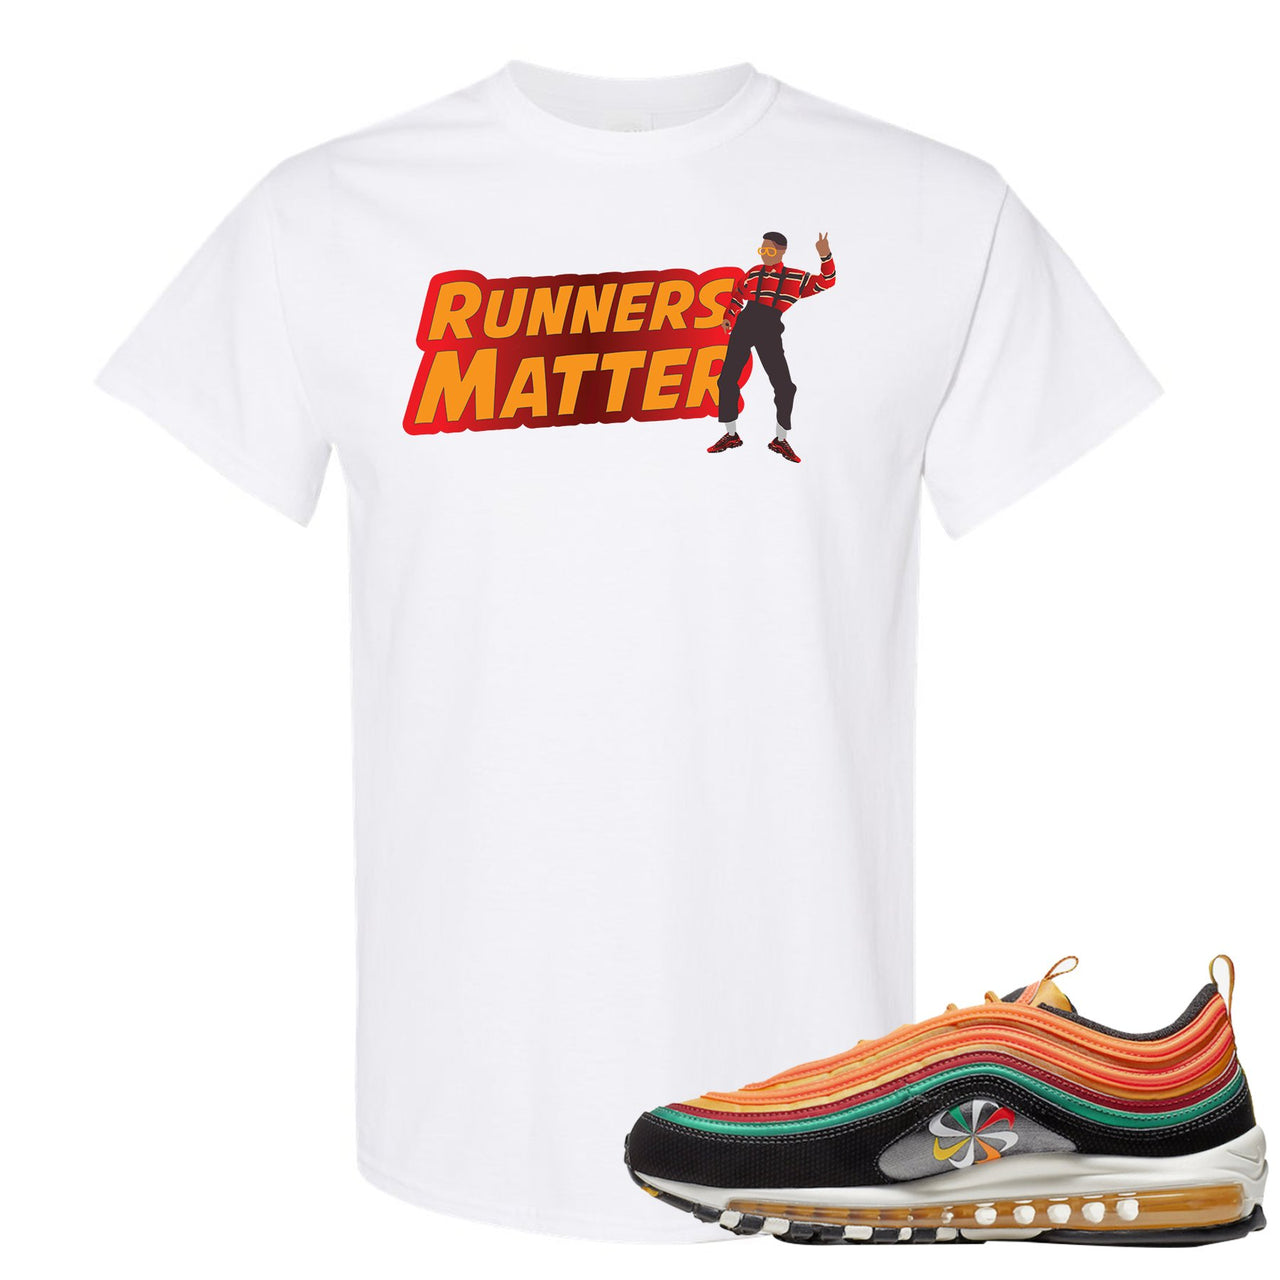 Printed on the front of the Air Max 97 Sunburst white sneaker matching t-shirt is the Runners Matter logo